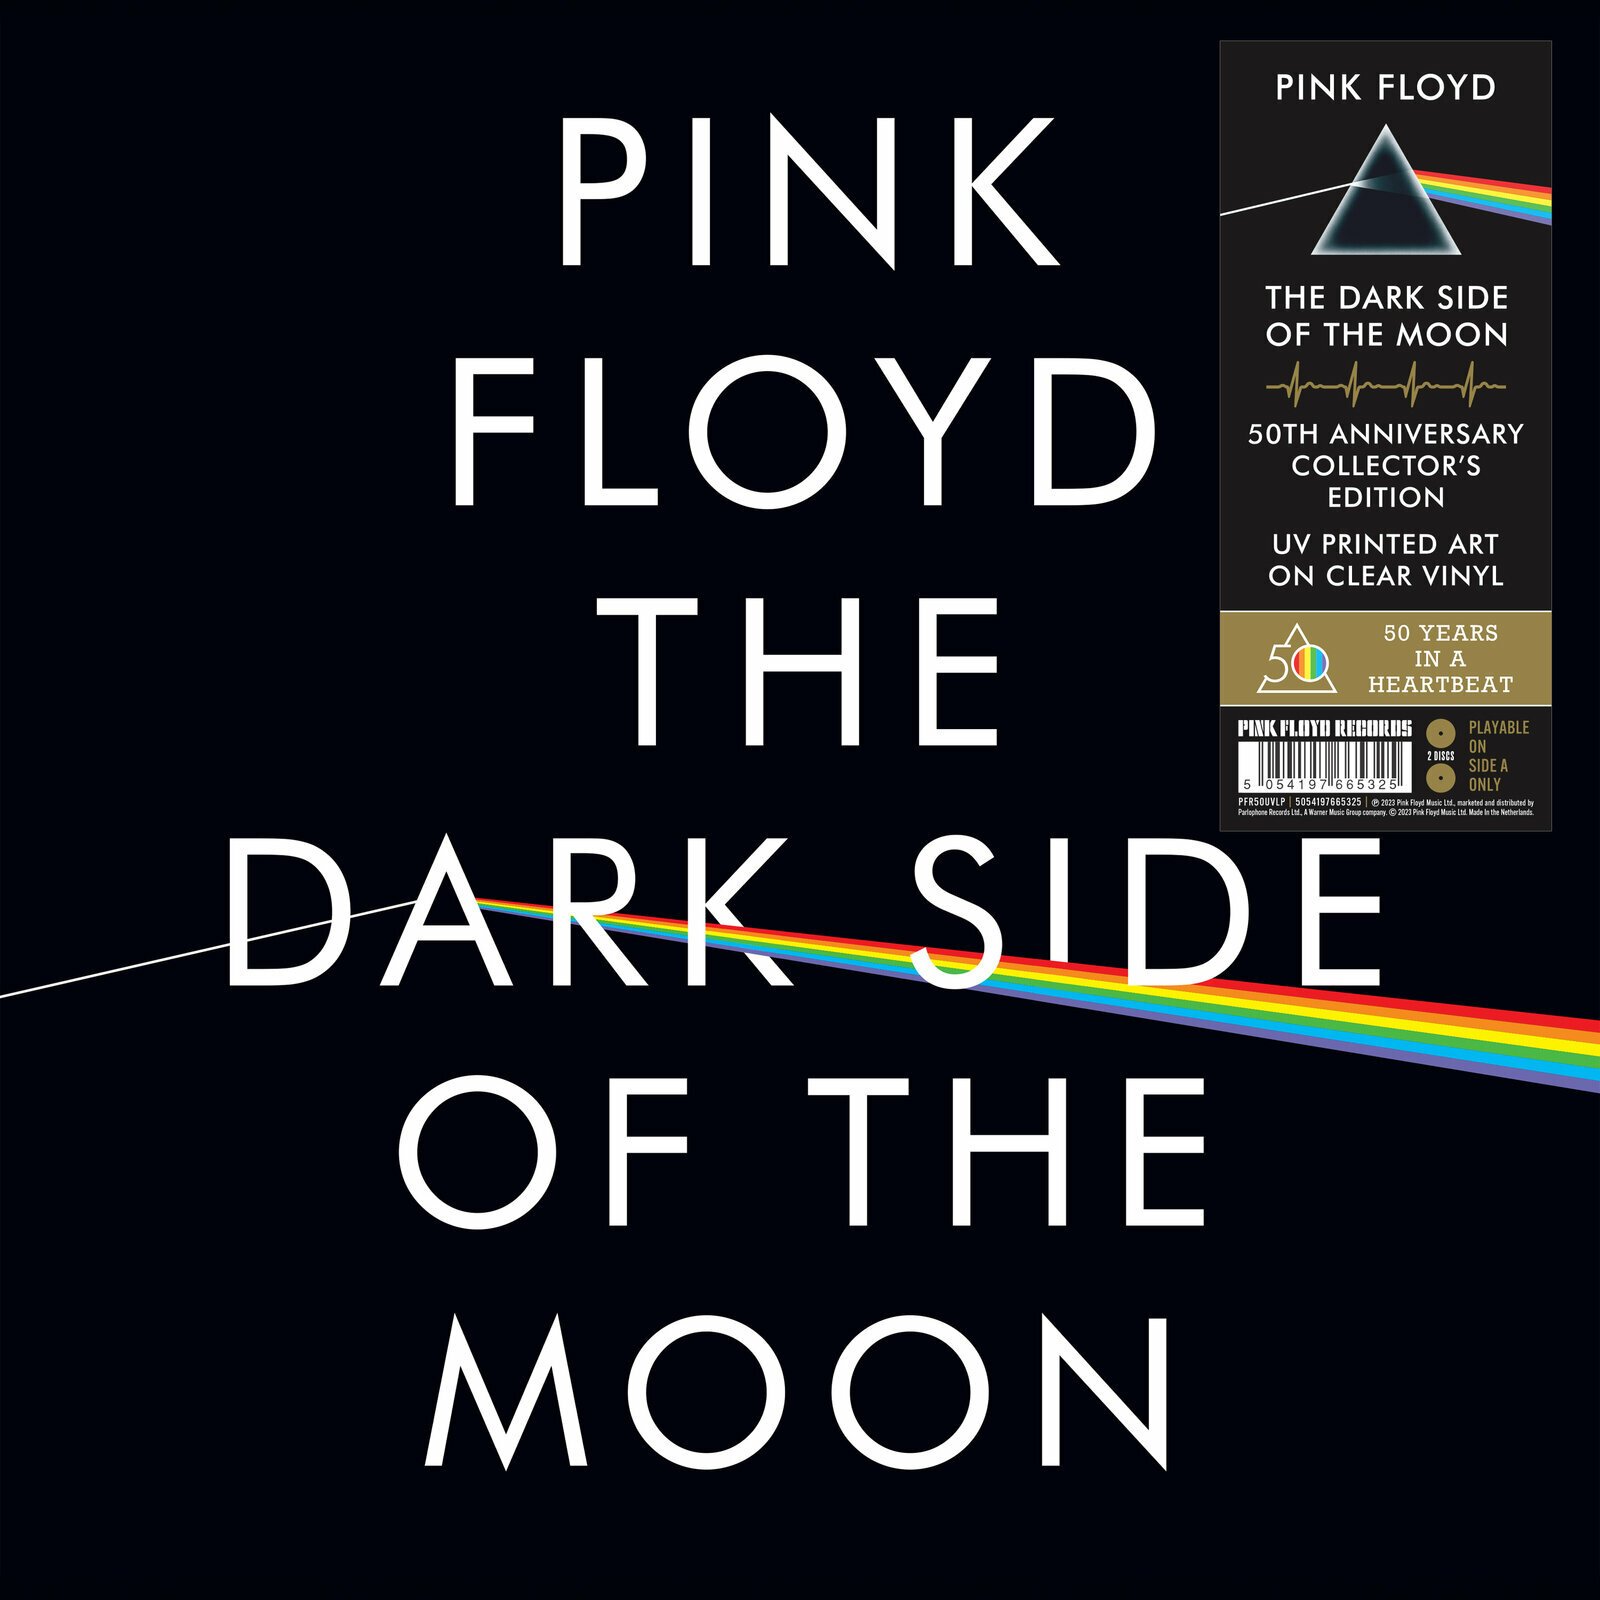 Pink Floyd - The Dark Side Of The Moon (50th Anniversary Edition) (Limited Edition) (Picture Disc) (2 LP) Pink Floyd